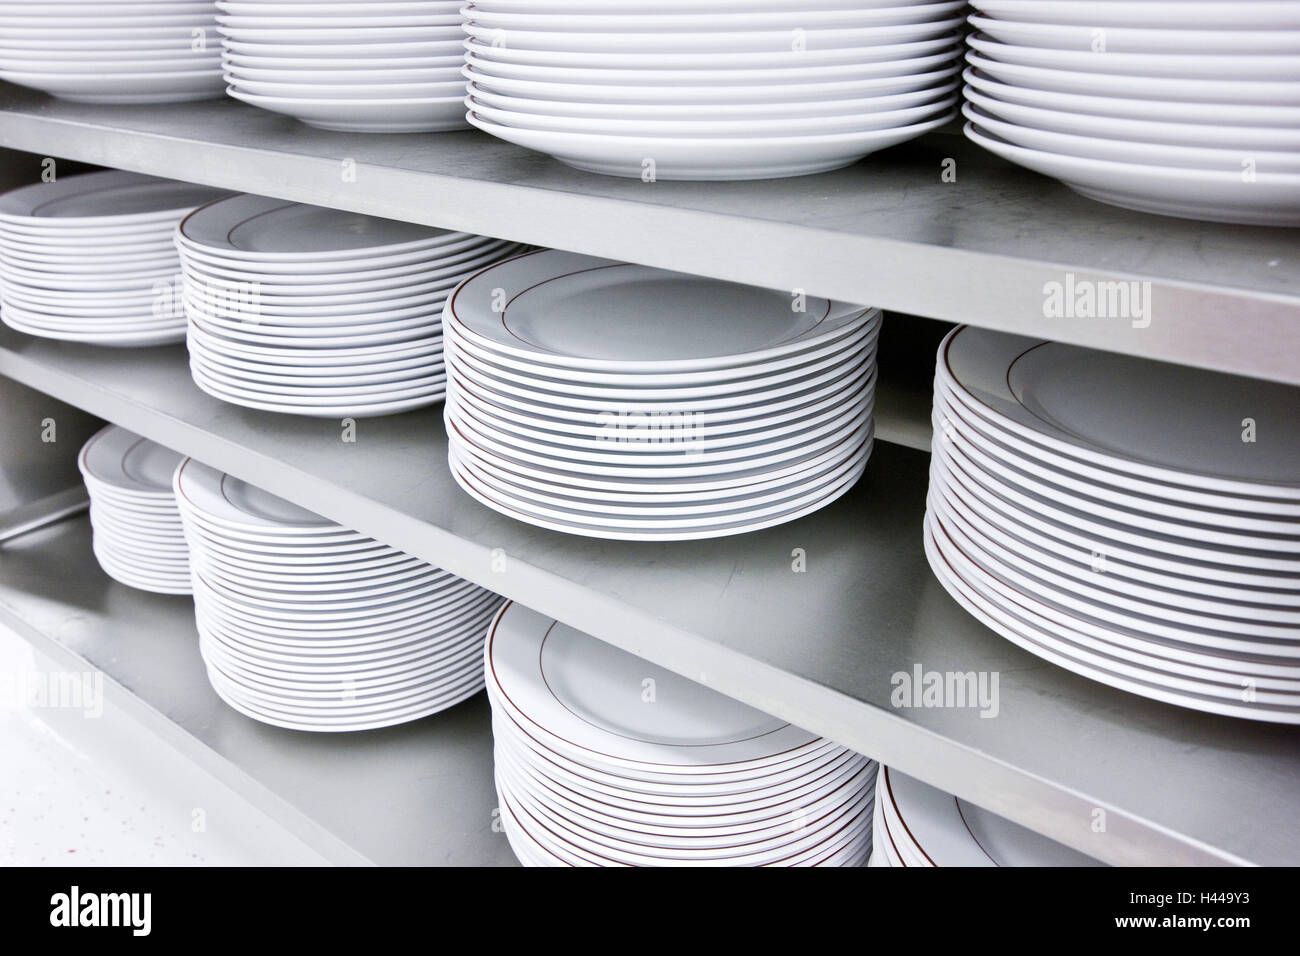 Shelf, plate, stacked, dishes, porcelain, batch, order, cleanly, white, cuisine, Stock Photo